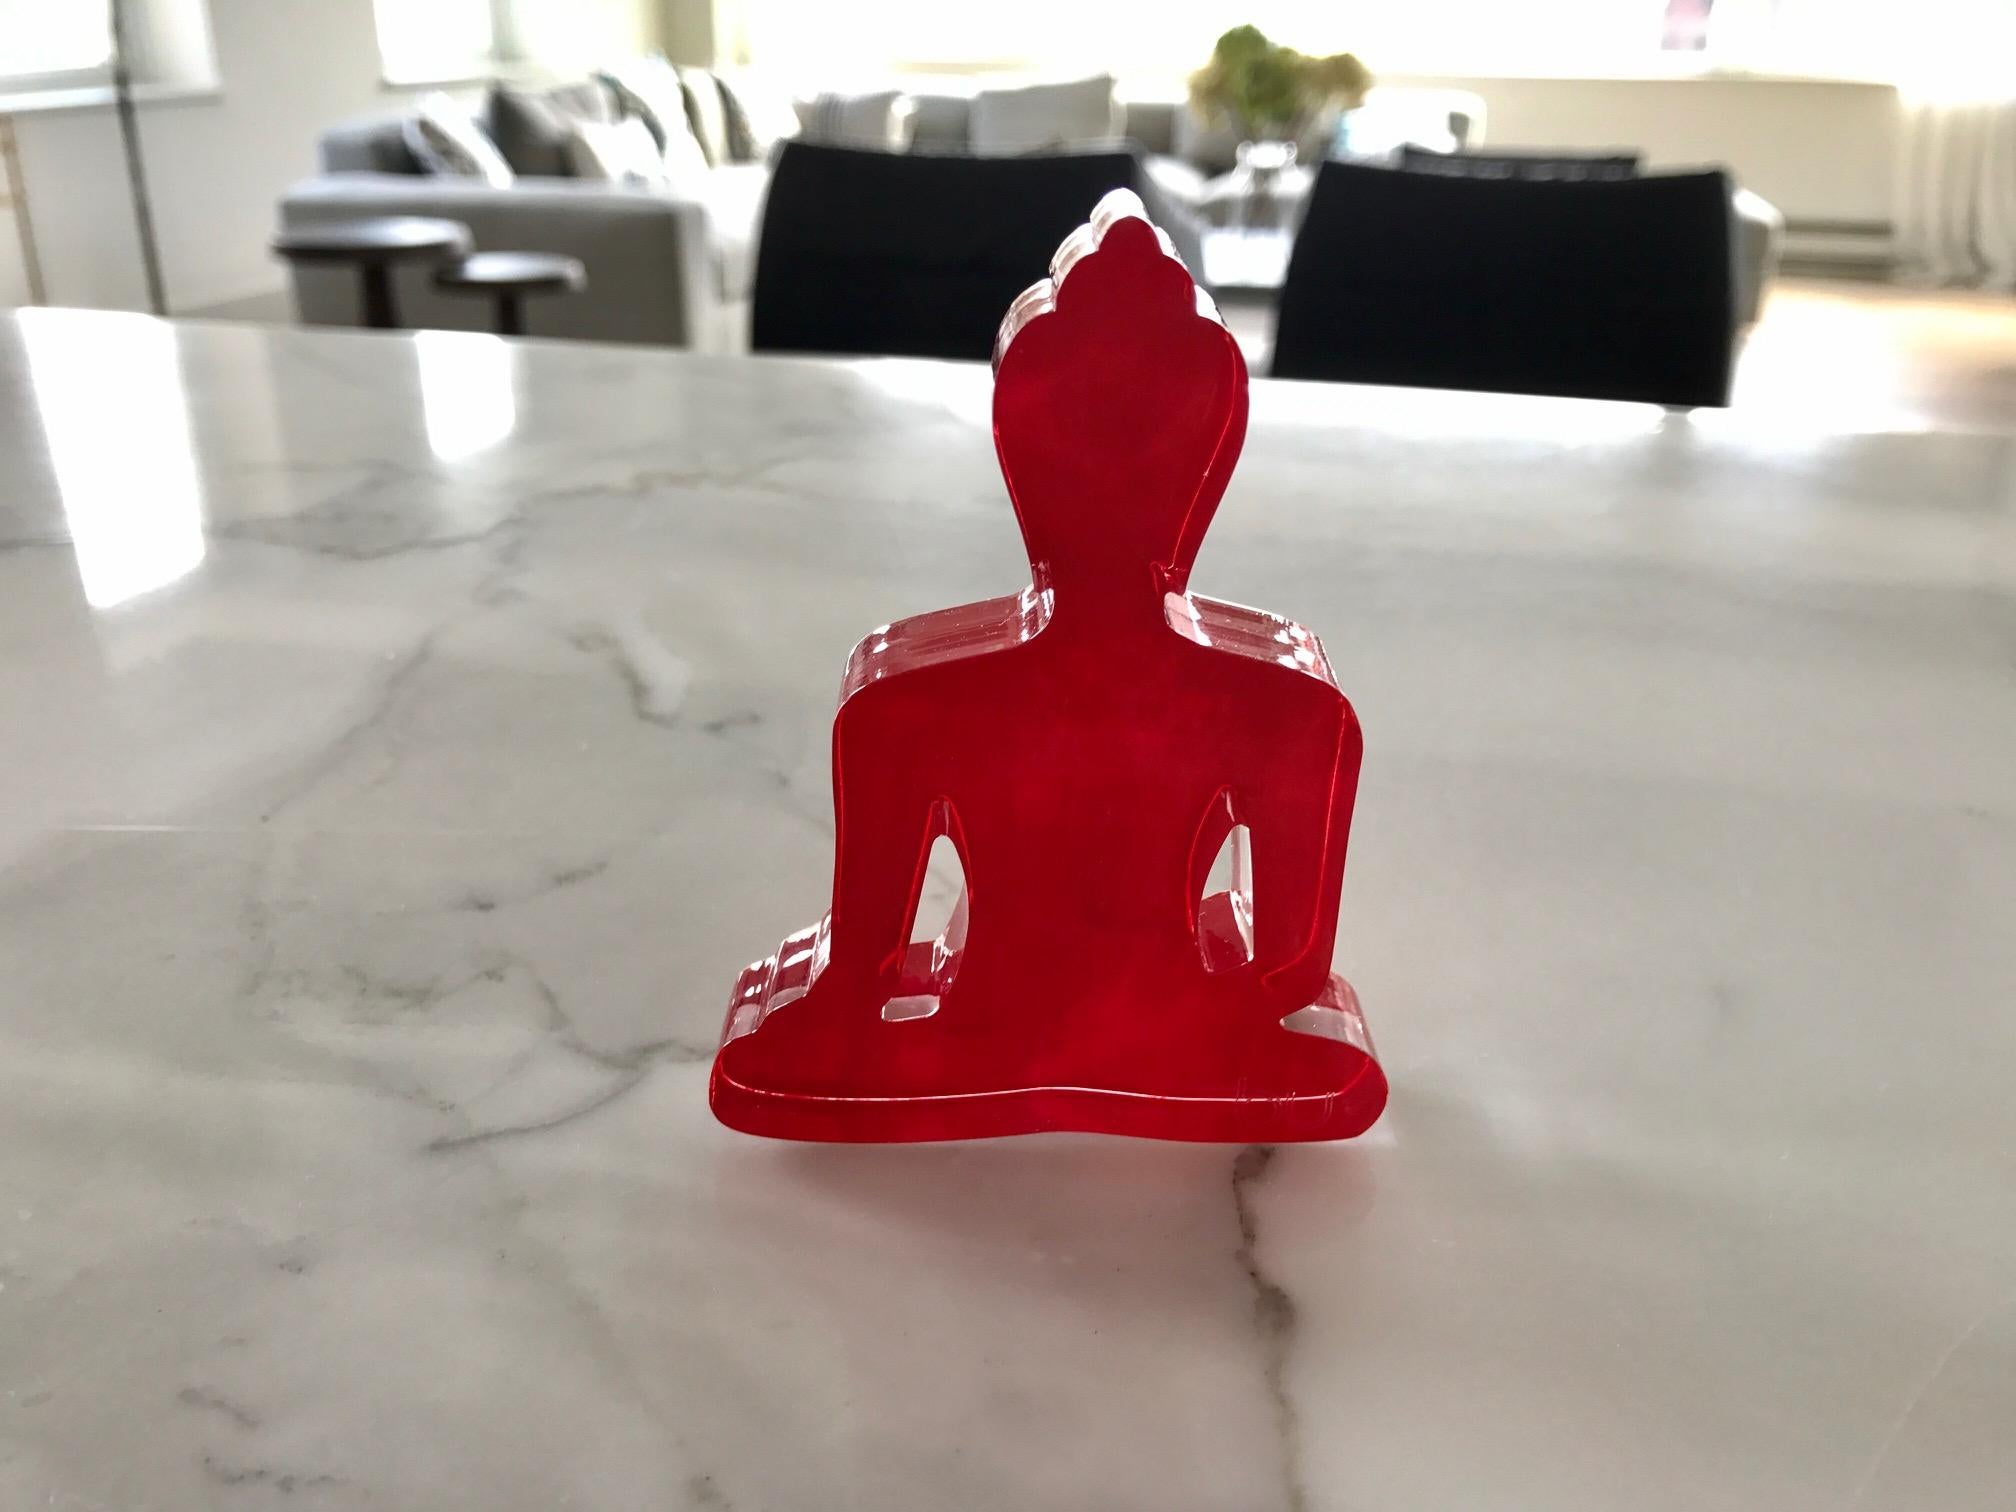 Red Mini Buddha sculpture, Plexiglas, hand painted  - Contemporary Sculpture by Tal Nehoray